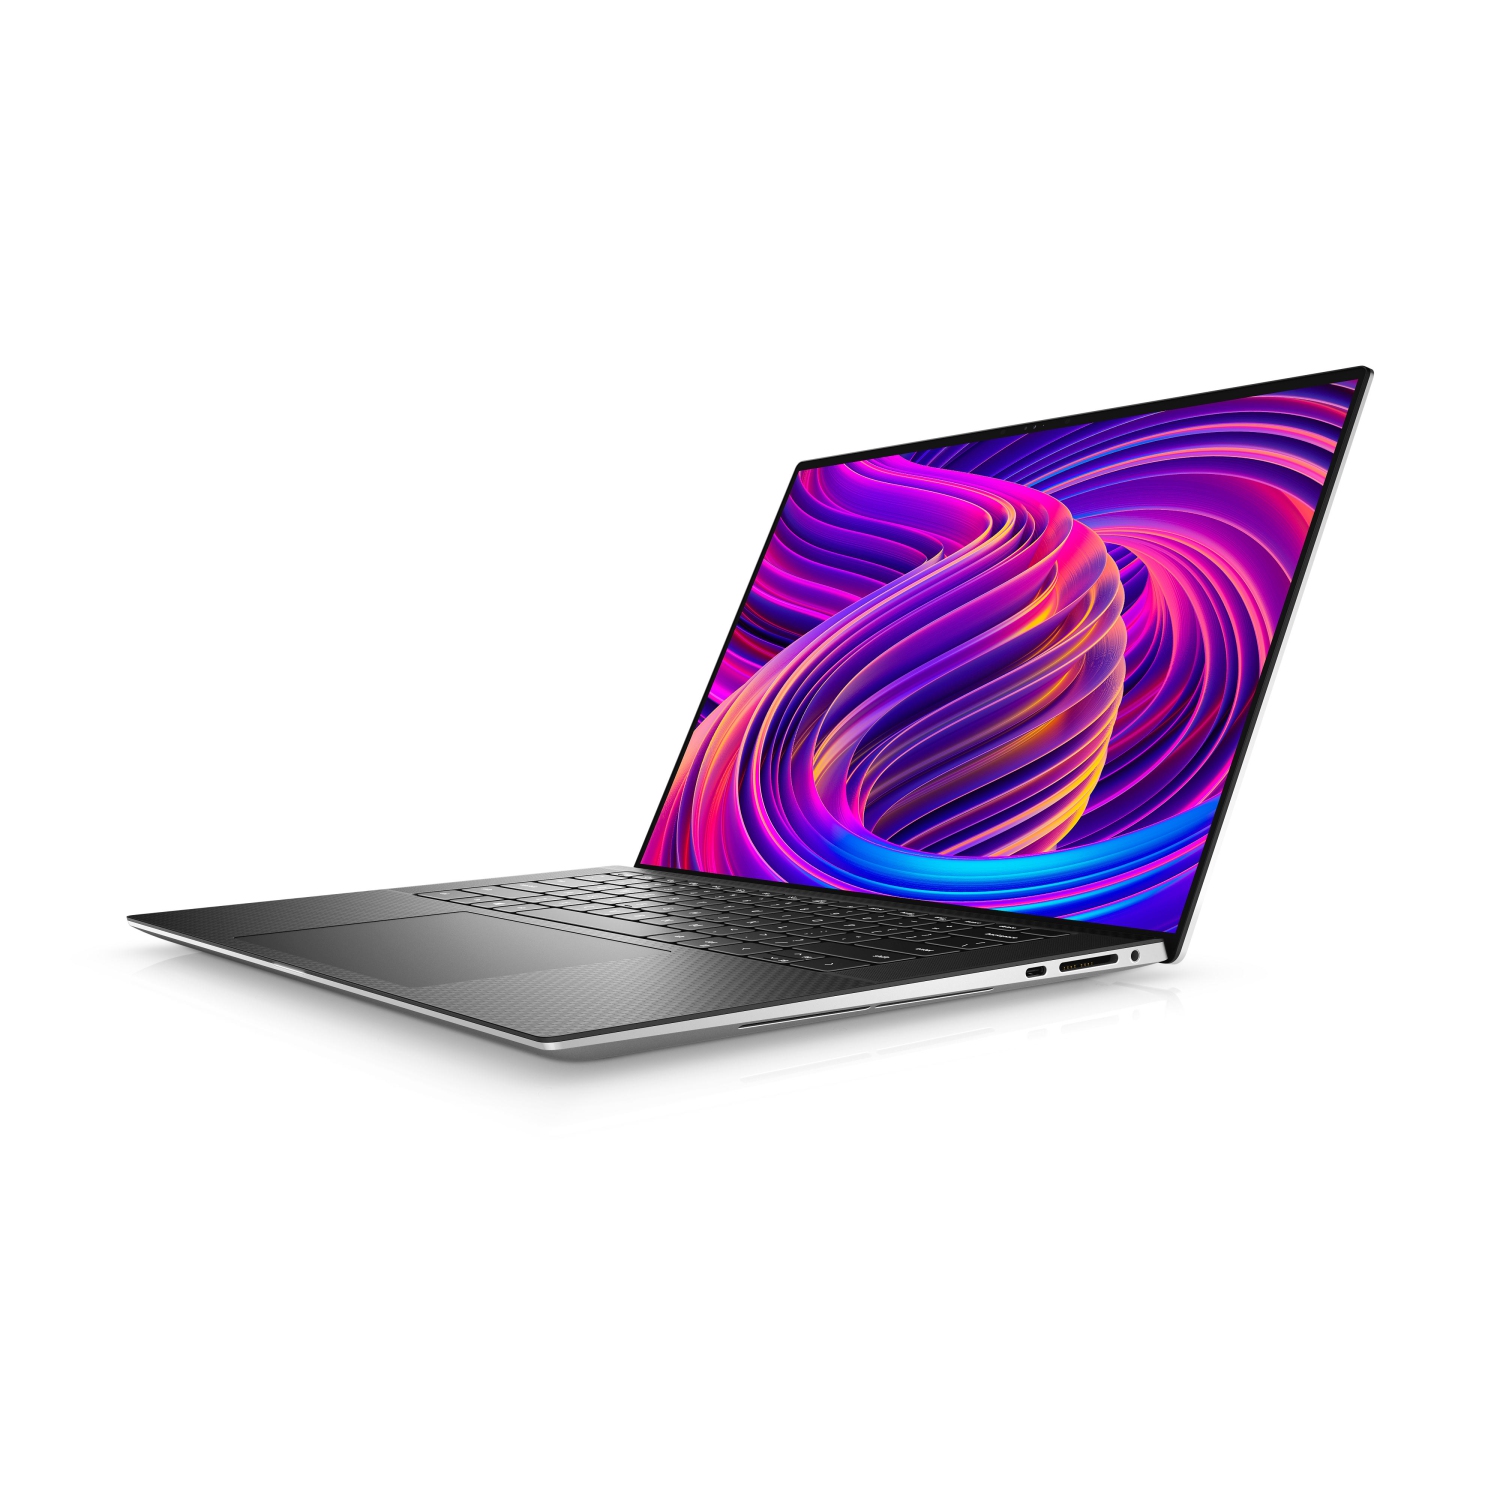 Refurbished (Excellent) - Dell XPS 15 9510 Laptop (2021) | 15.6" FHD+ | Core i9 - 2TB SSD - 32GB RAM - 3050 Ti | 8 Cores @ 4.9 GHz - 11th Gen CPU Certified Refurbished